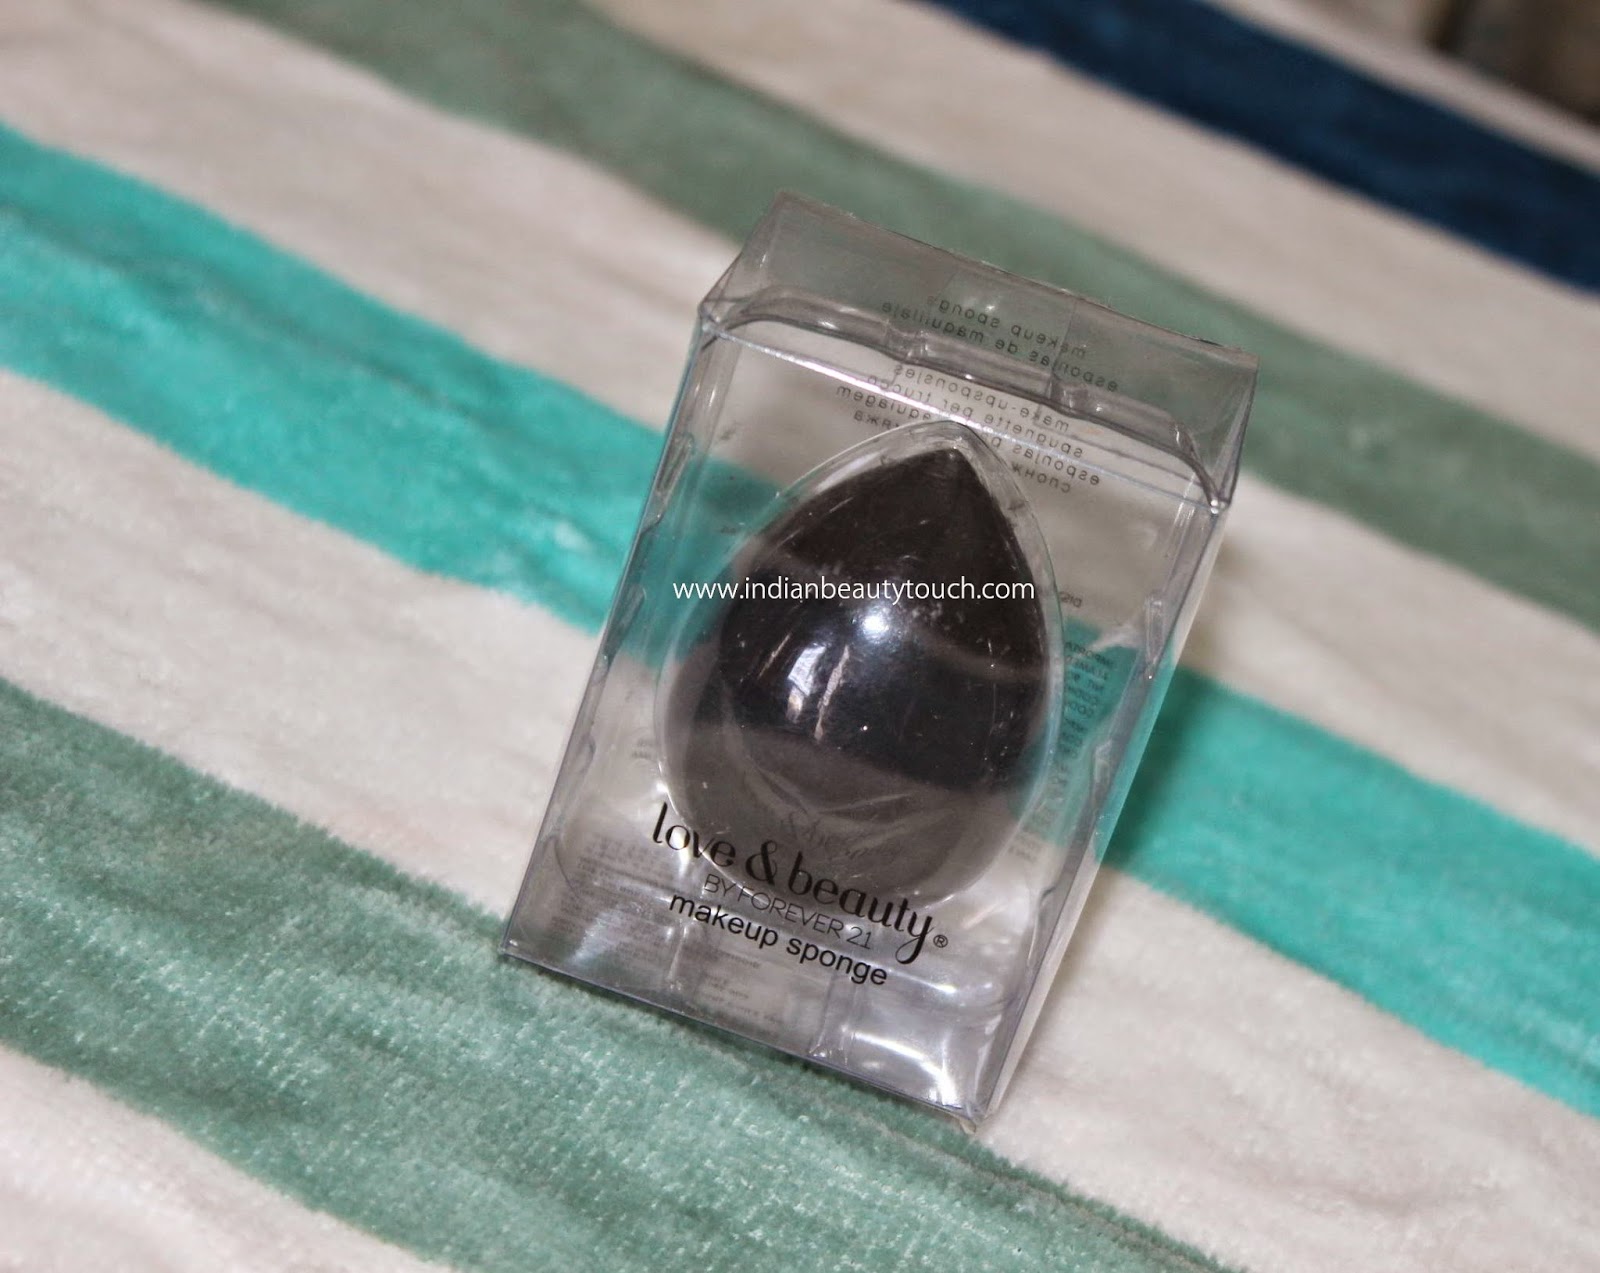 Review n Demo : Love & Beauty by Forever 21 Makeup Sponge | Indian ...